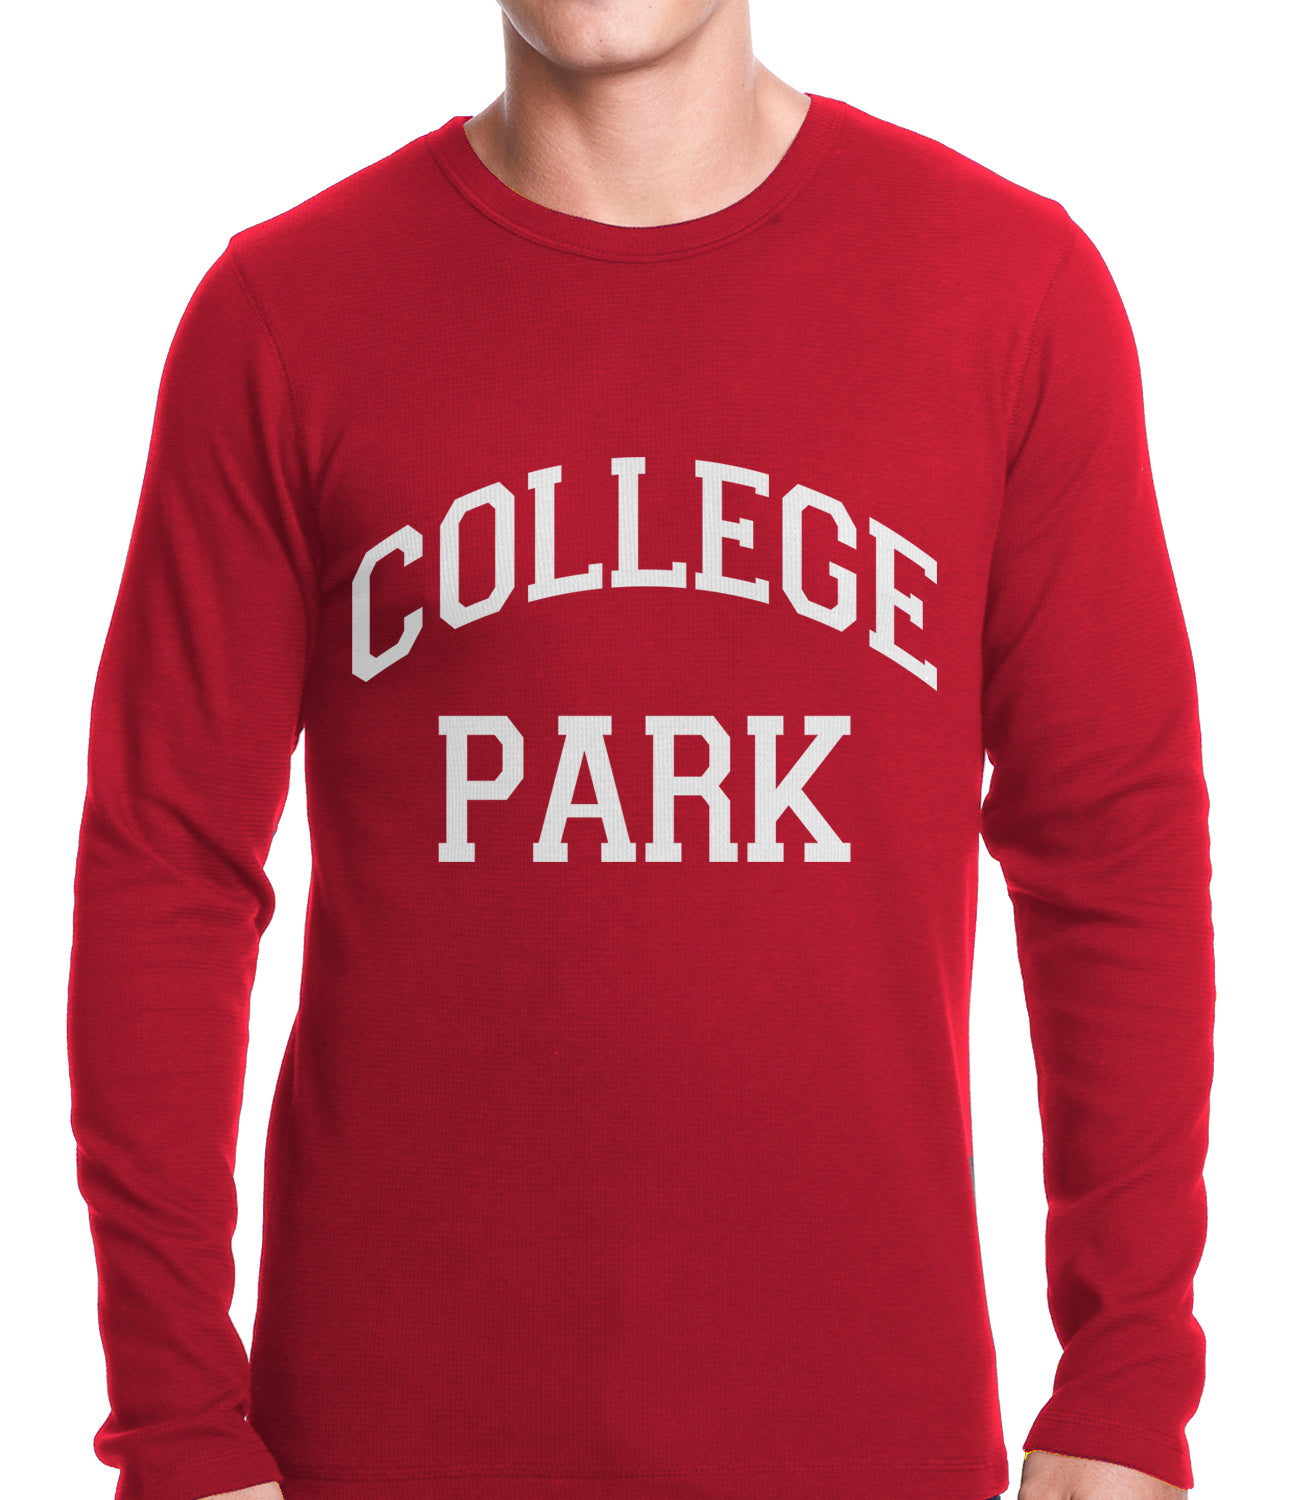 College Park Brooklyn Thermal Shirt